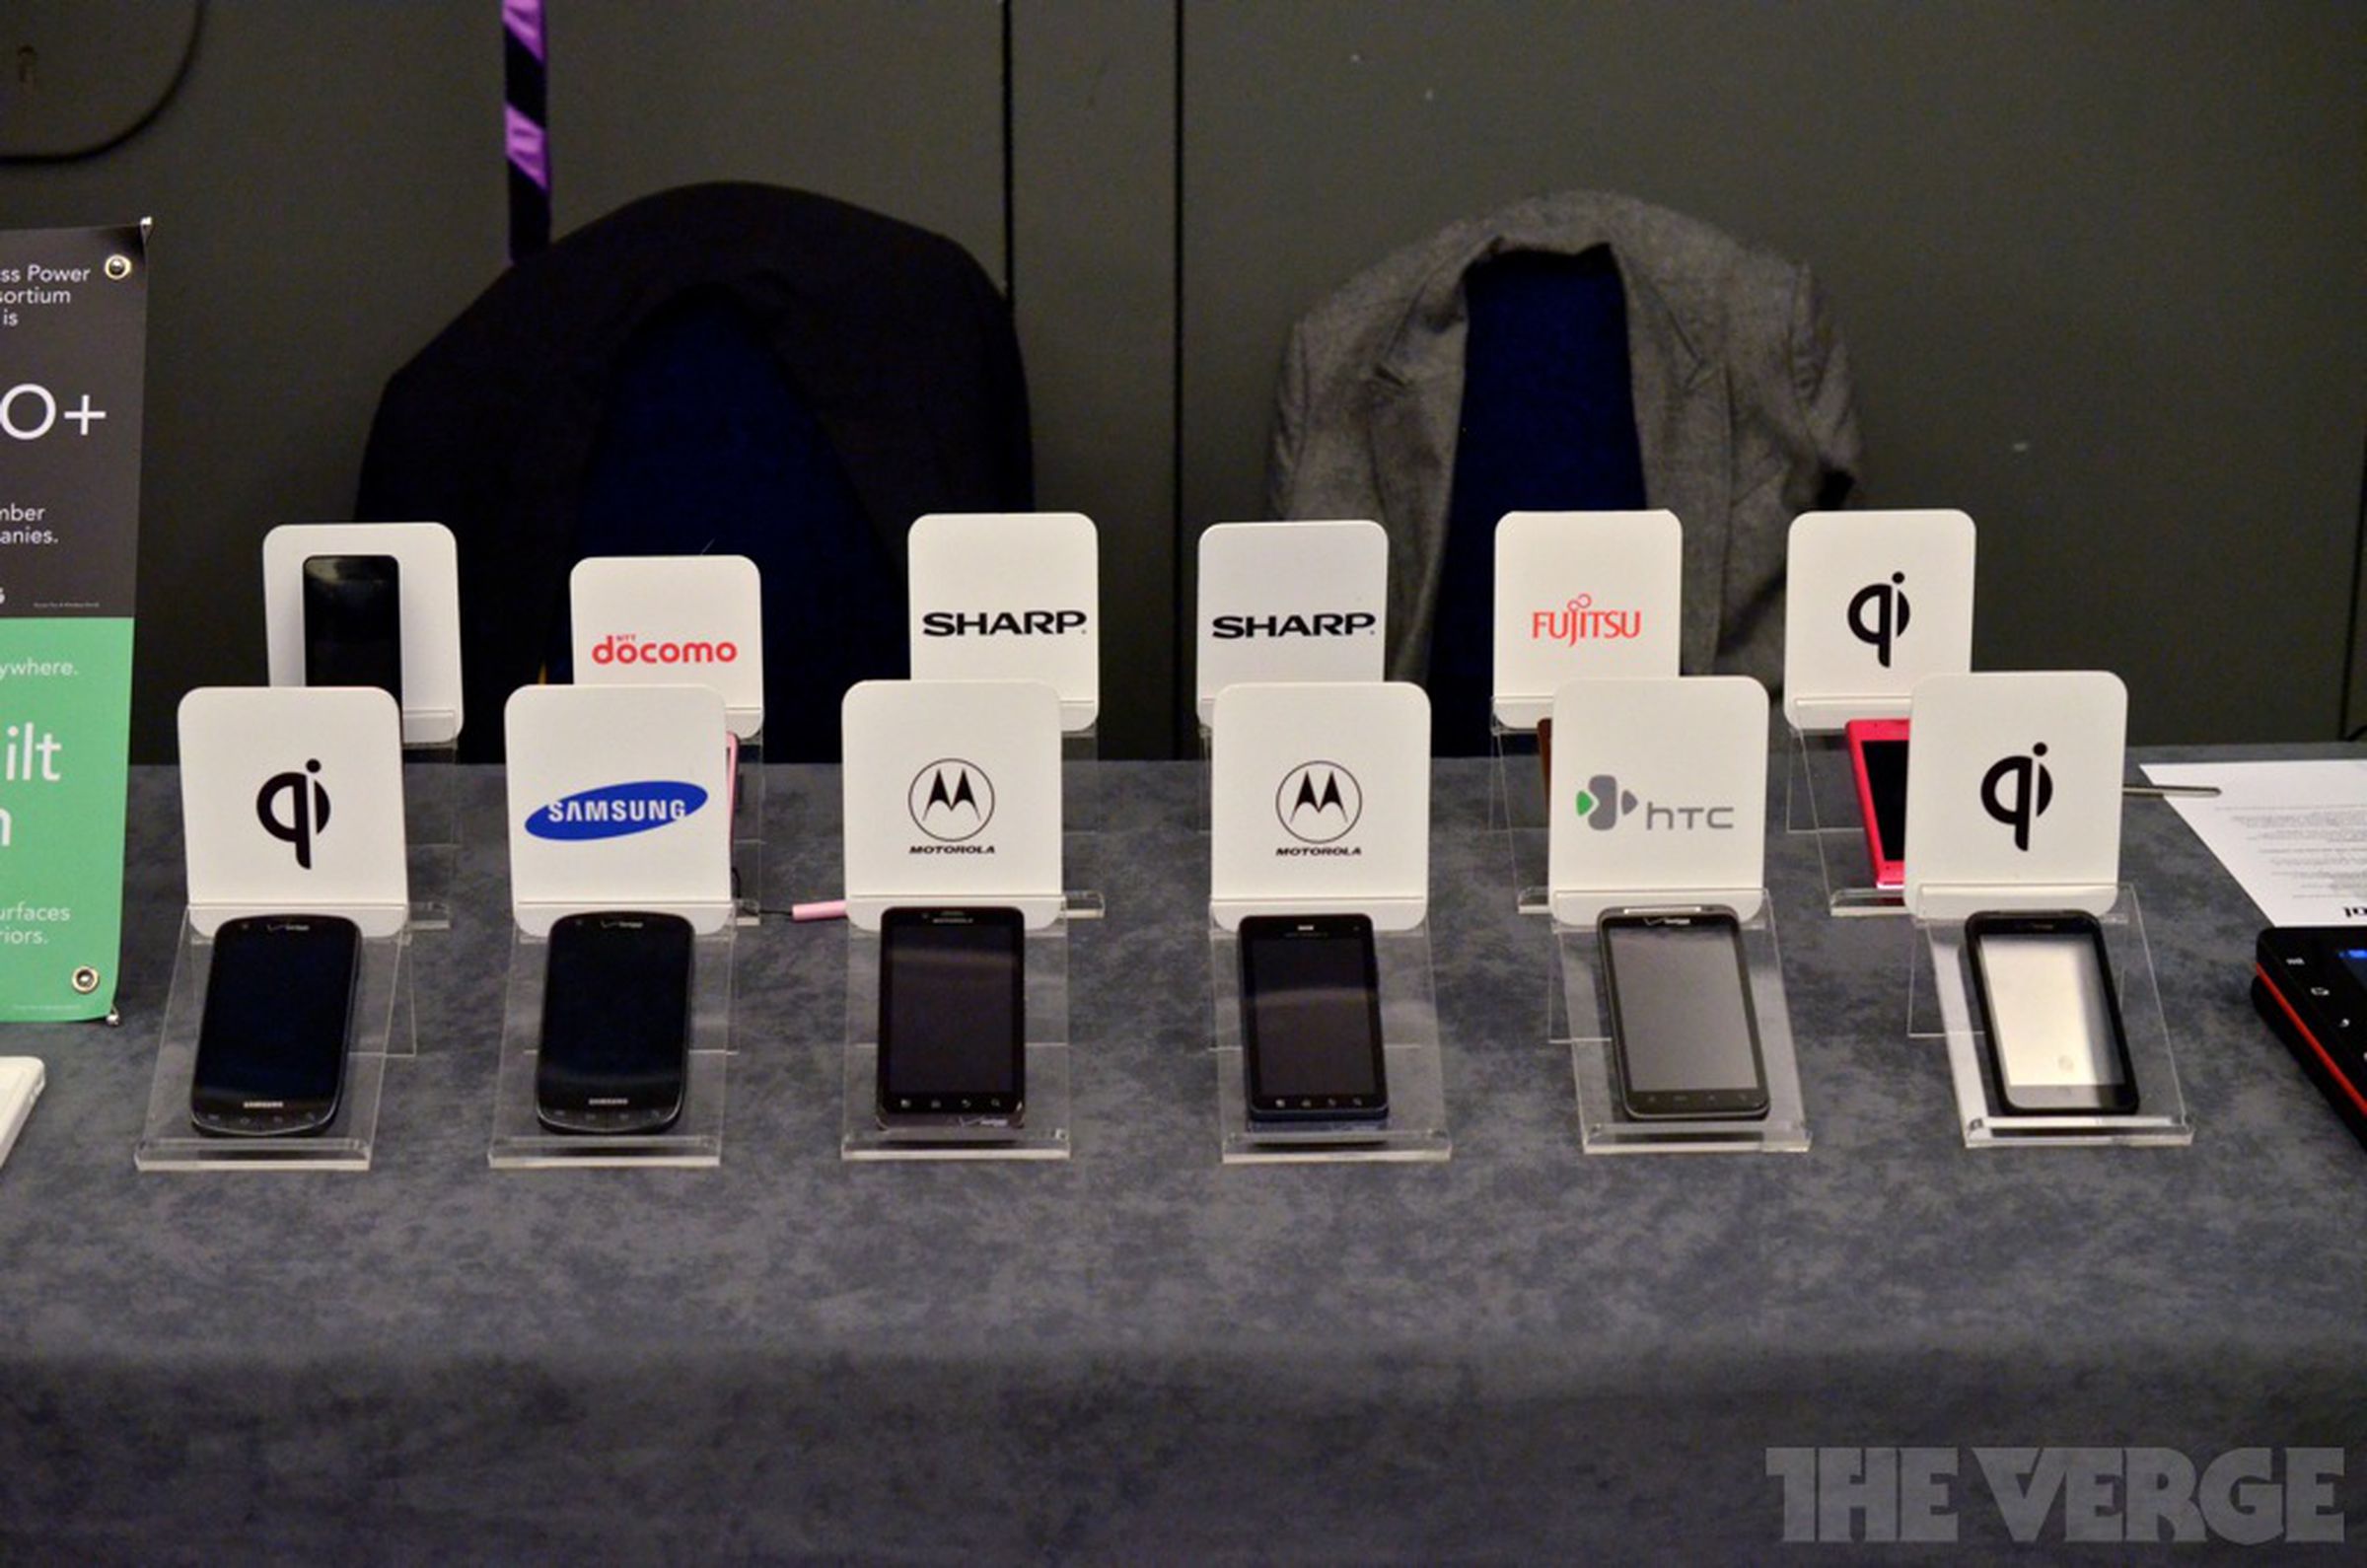 Qi wireless charging at Mobile World Congress 2012